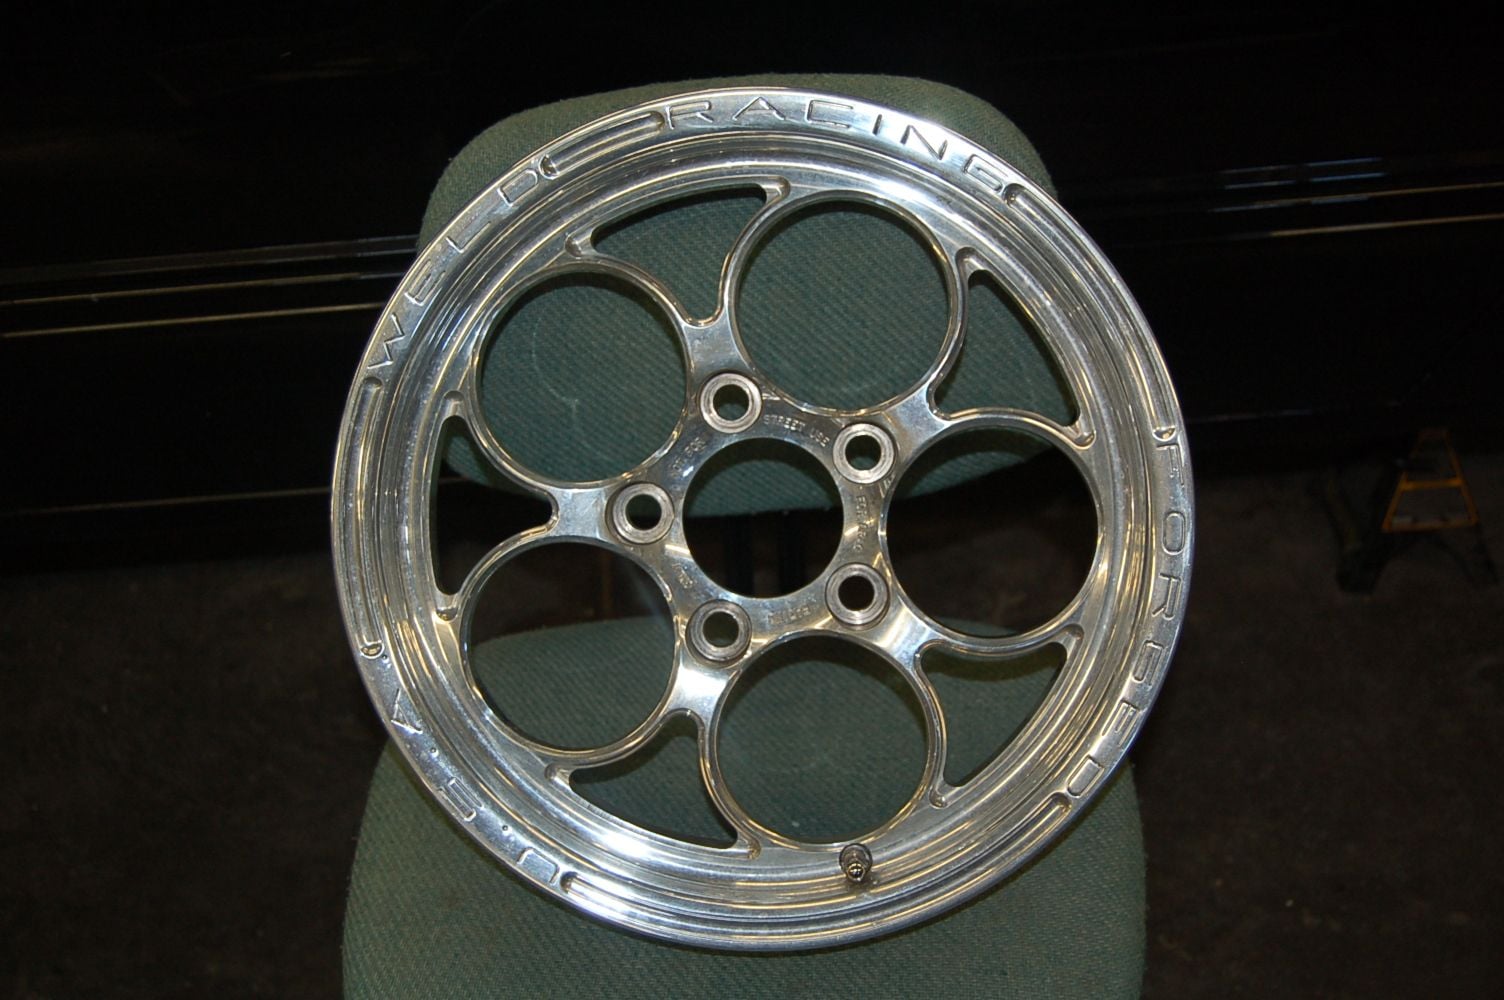  - Weld racing magnum 2.0 drag racing wheels gm bolt pattern - Carlinville, IL 62626, United States